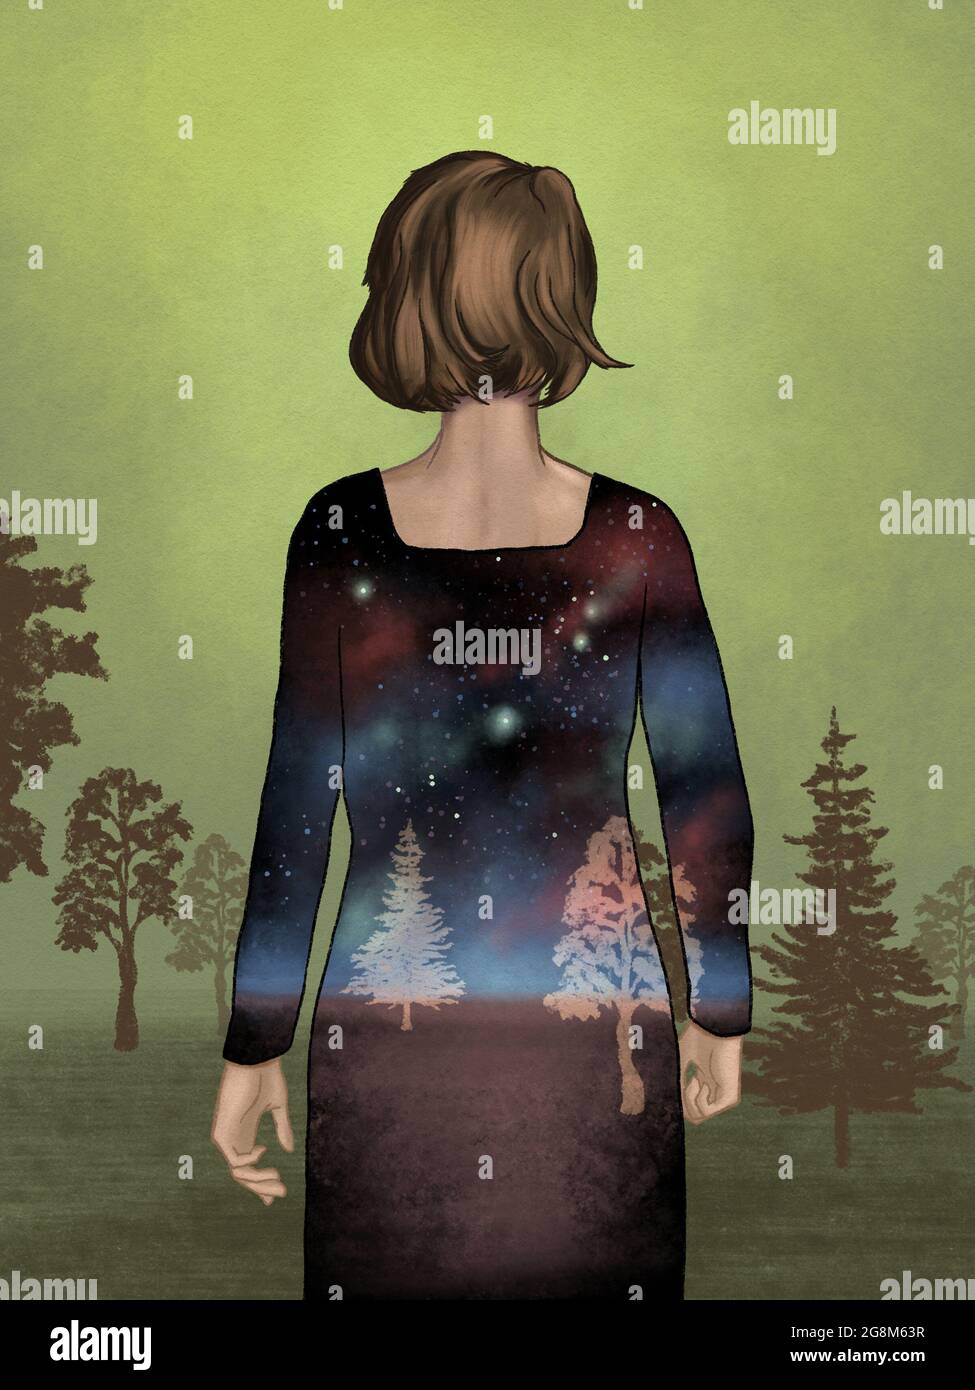 Girl standing on the edge of a forest. Her dress is a window to a night landscape. Digital illustration. Stock Photo